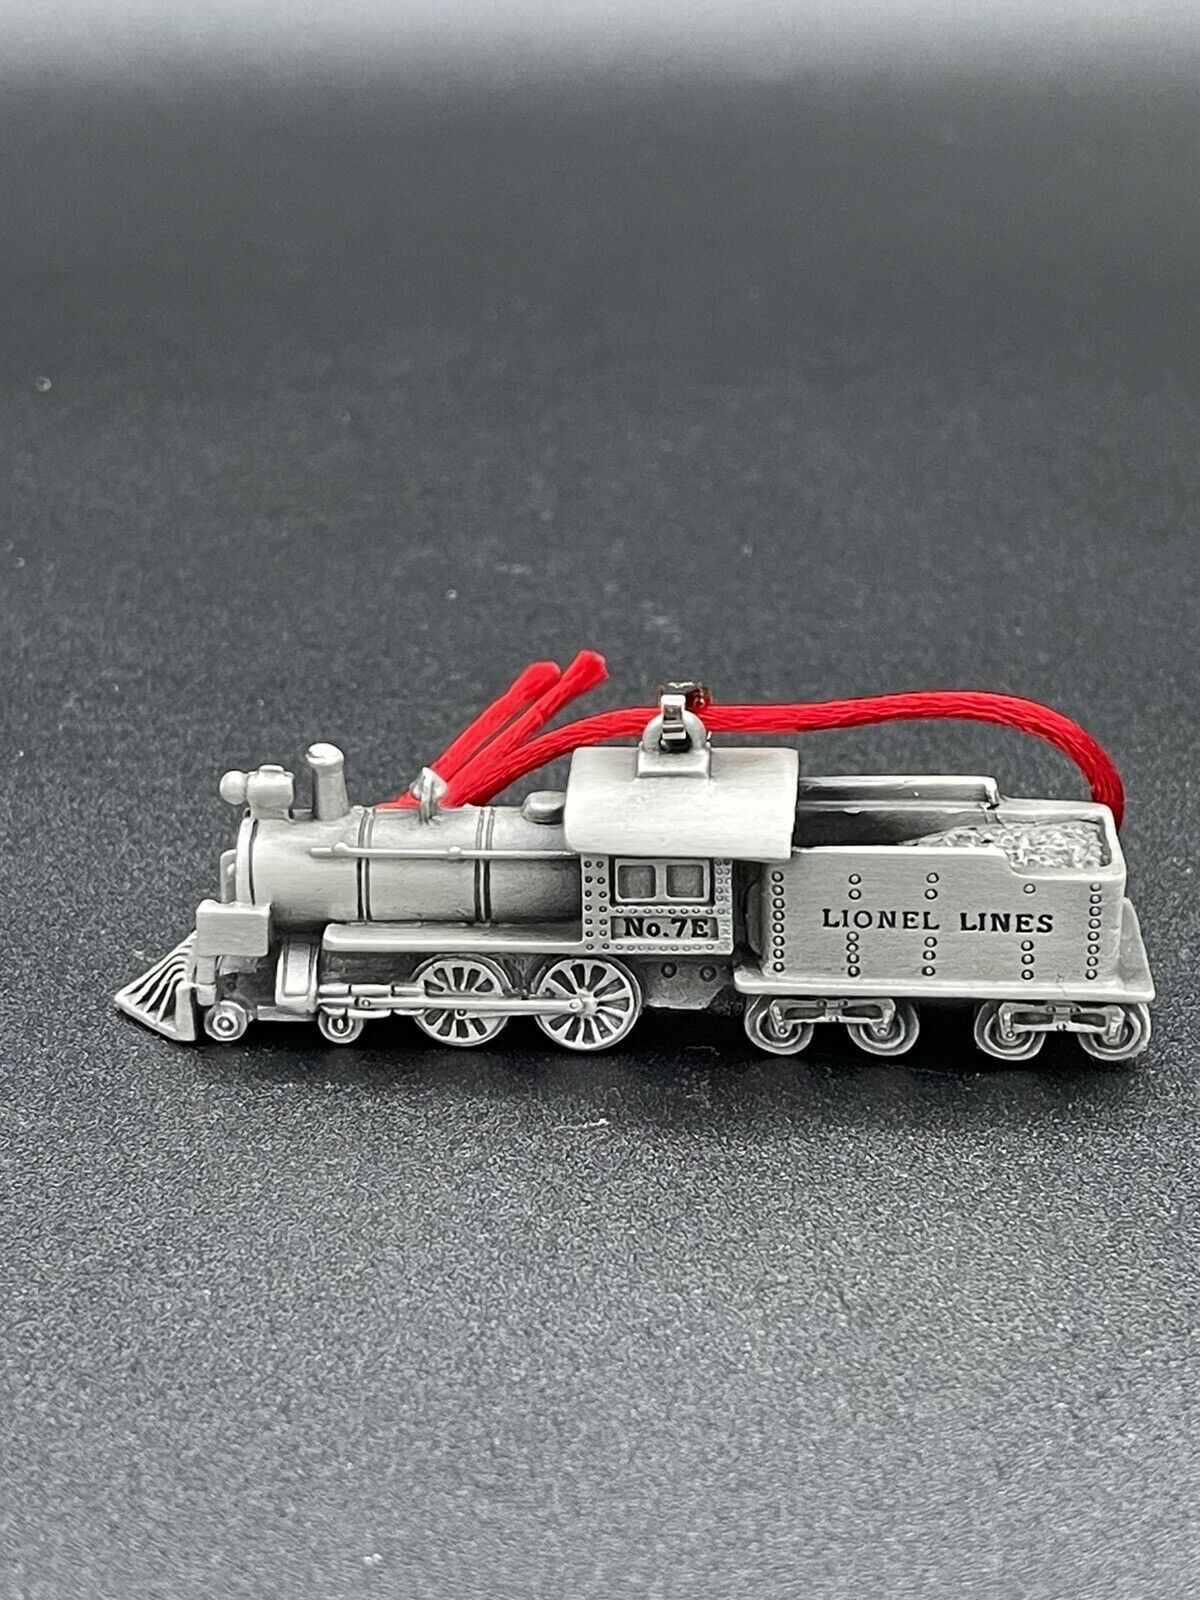 Lionel Fine Pewter Collectible Ornament Old #7 Steam Locomotive &Tender 29-603